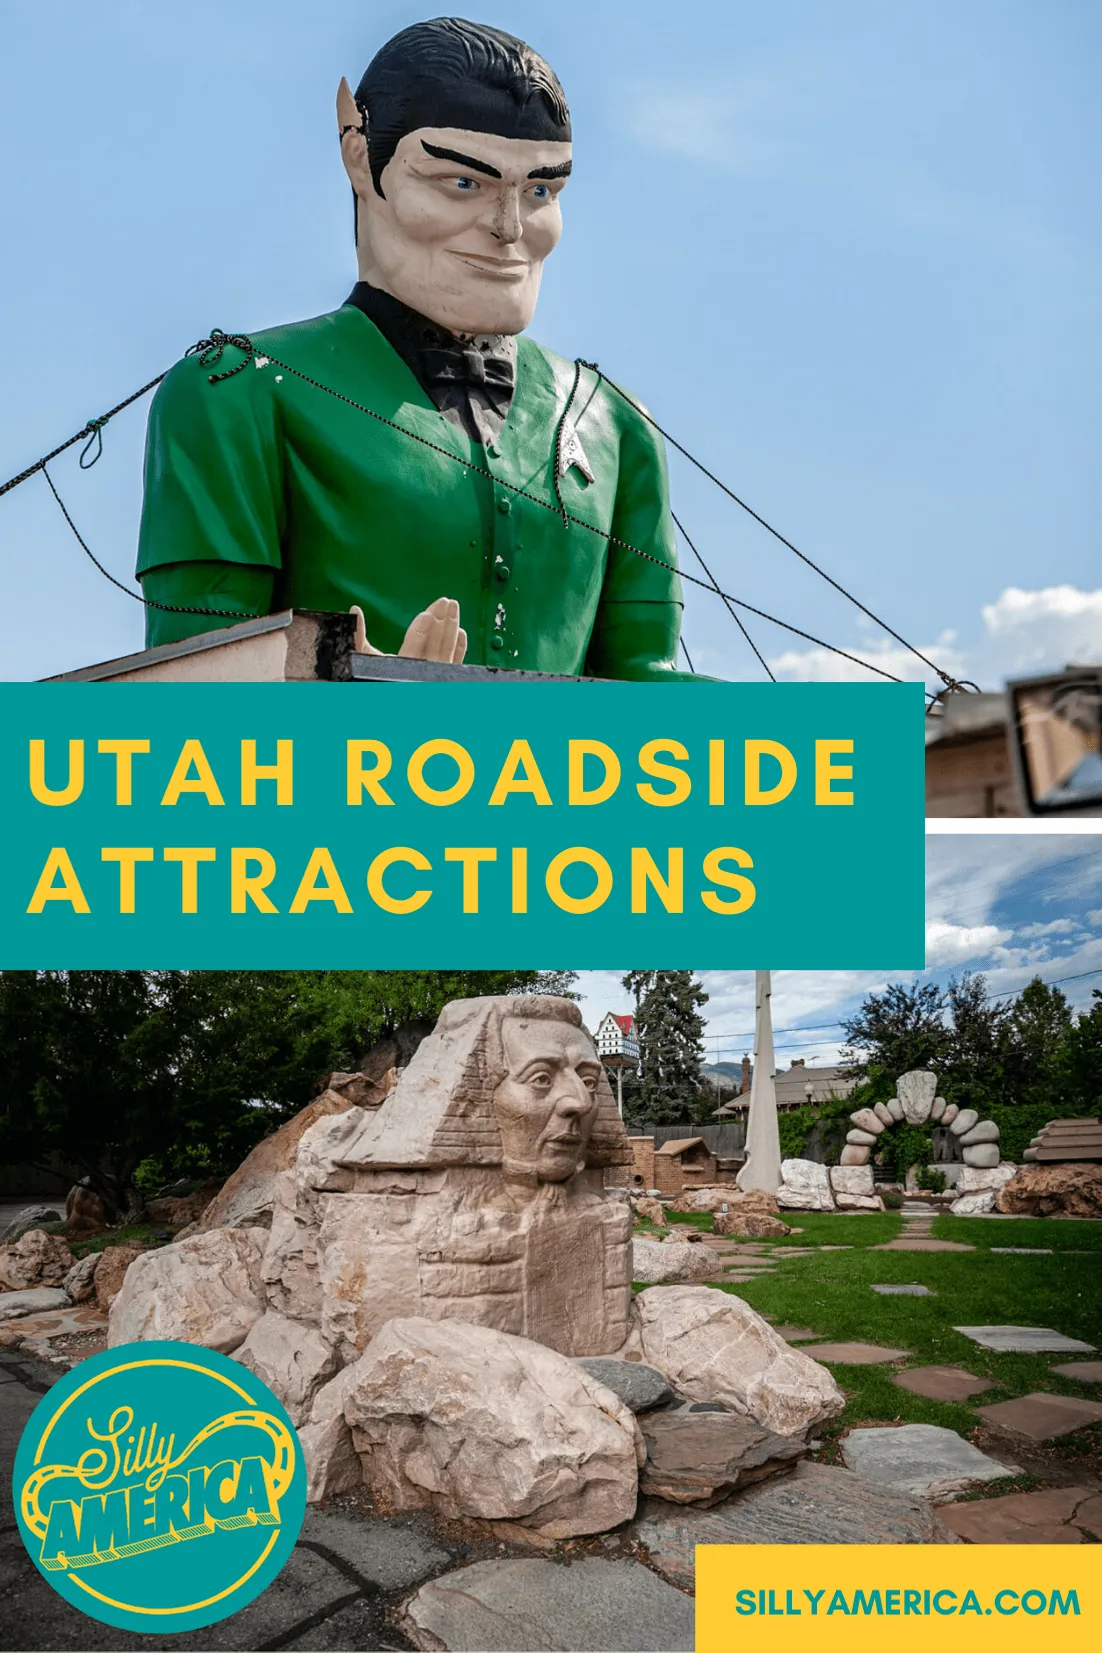 The best Utah roadside attractions to visit on a Utah road trip or weekend getaway. Add these roadside oddities to your travel bucket list or itinerary! #UtahRoadsideAttractions #UtahRoadsideAttraction #RoadsideAttractions #RoadsideAttraction #RoadTrip #UtahRoadTrip #UtahRoadTripWithKids #UtahRoadTripBucketLists #UtahBucketList #UtahRoadTripItinerary #UtahRoadTripPictures #UtahRoadTripMap #UtahWeekendRoadTrip #SaltLakeCityRoadTrip #UtahRoadTripAdventure #WeirdRoadsideAttractions